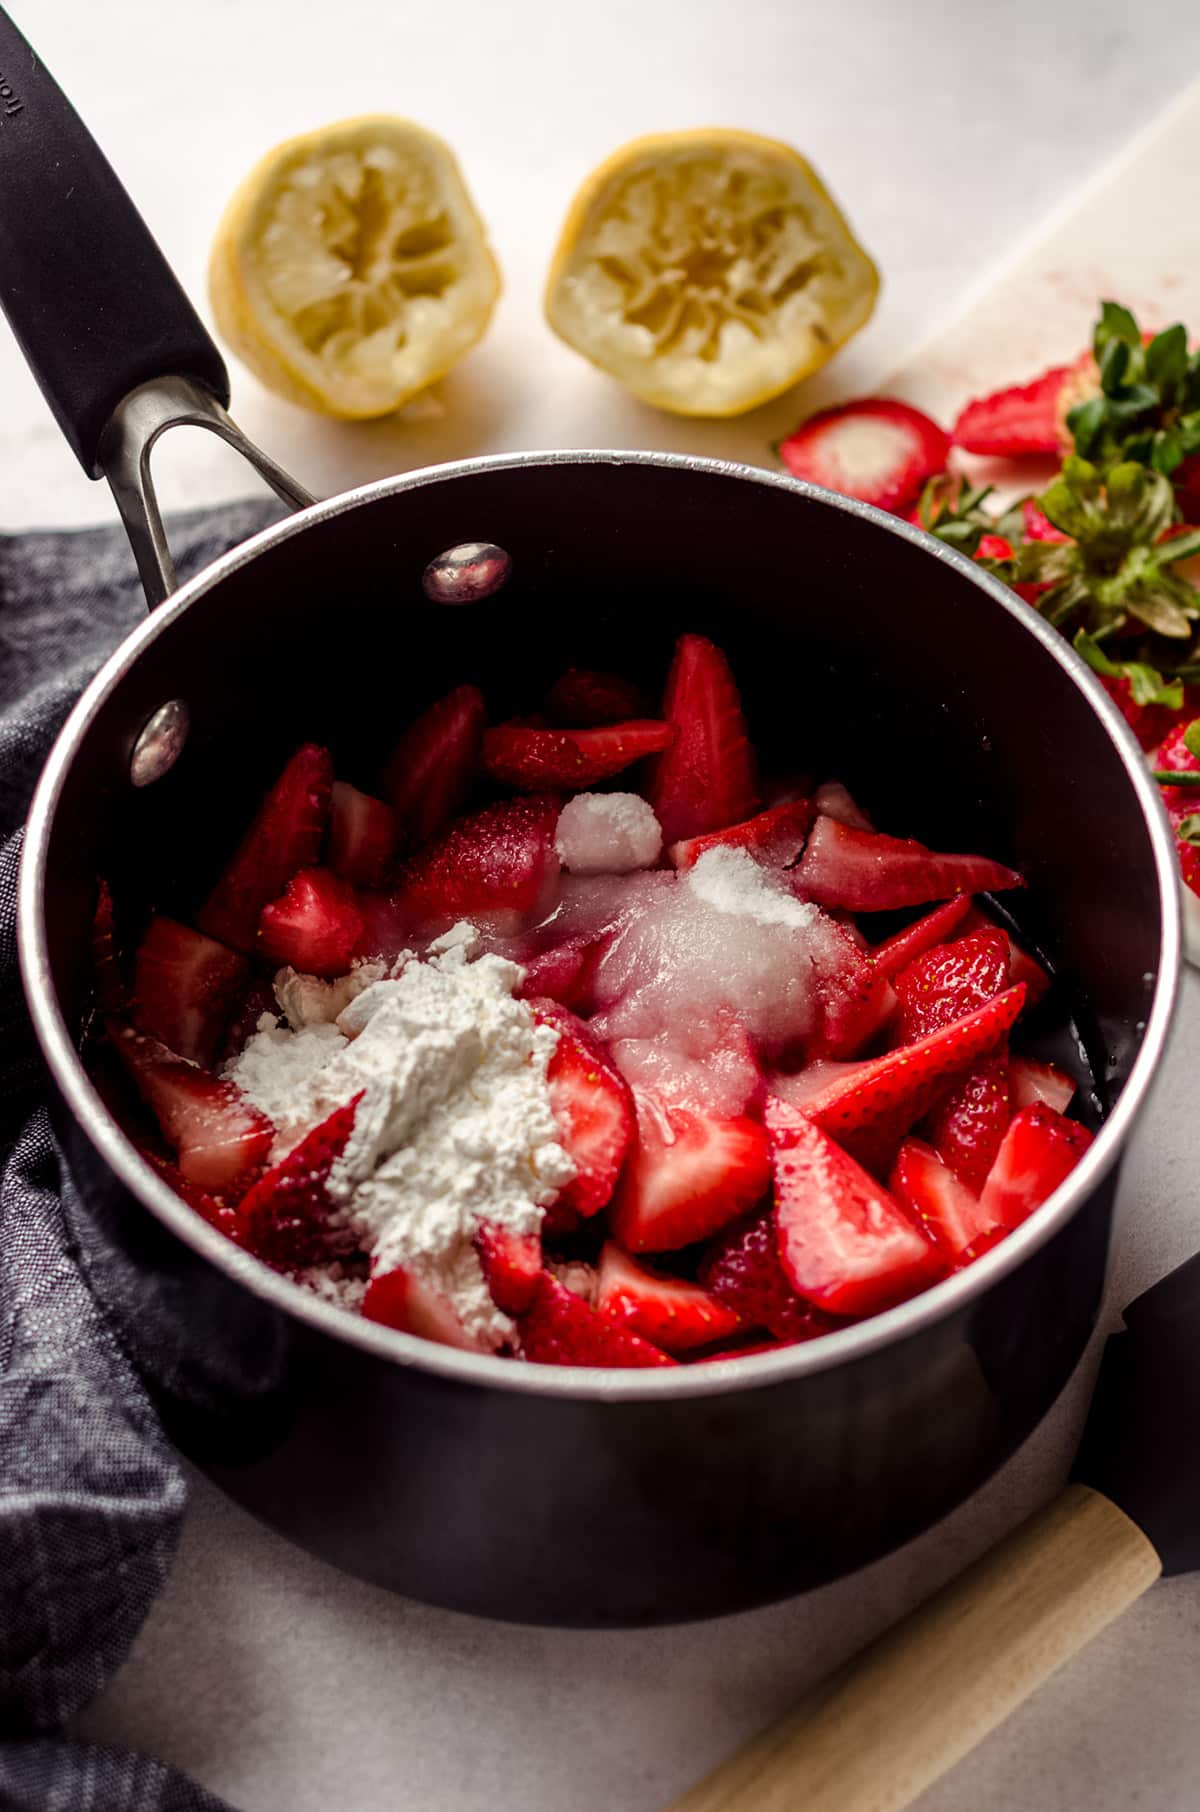 ingredients to make strawberry compote in a saucepan